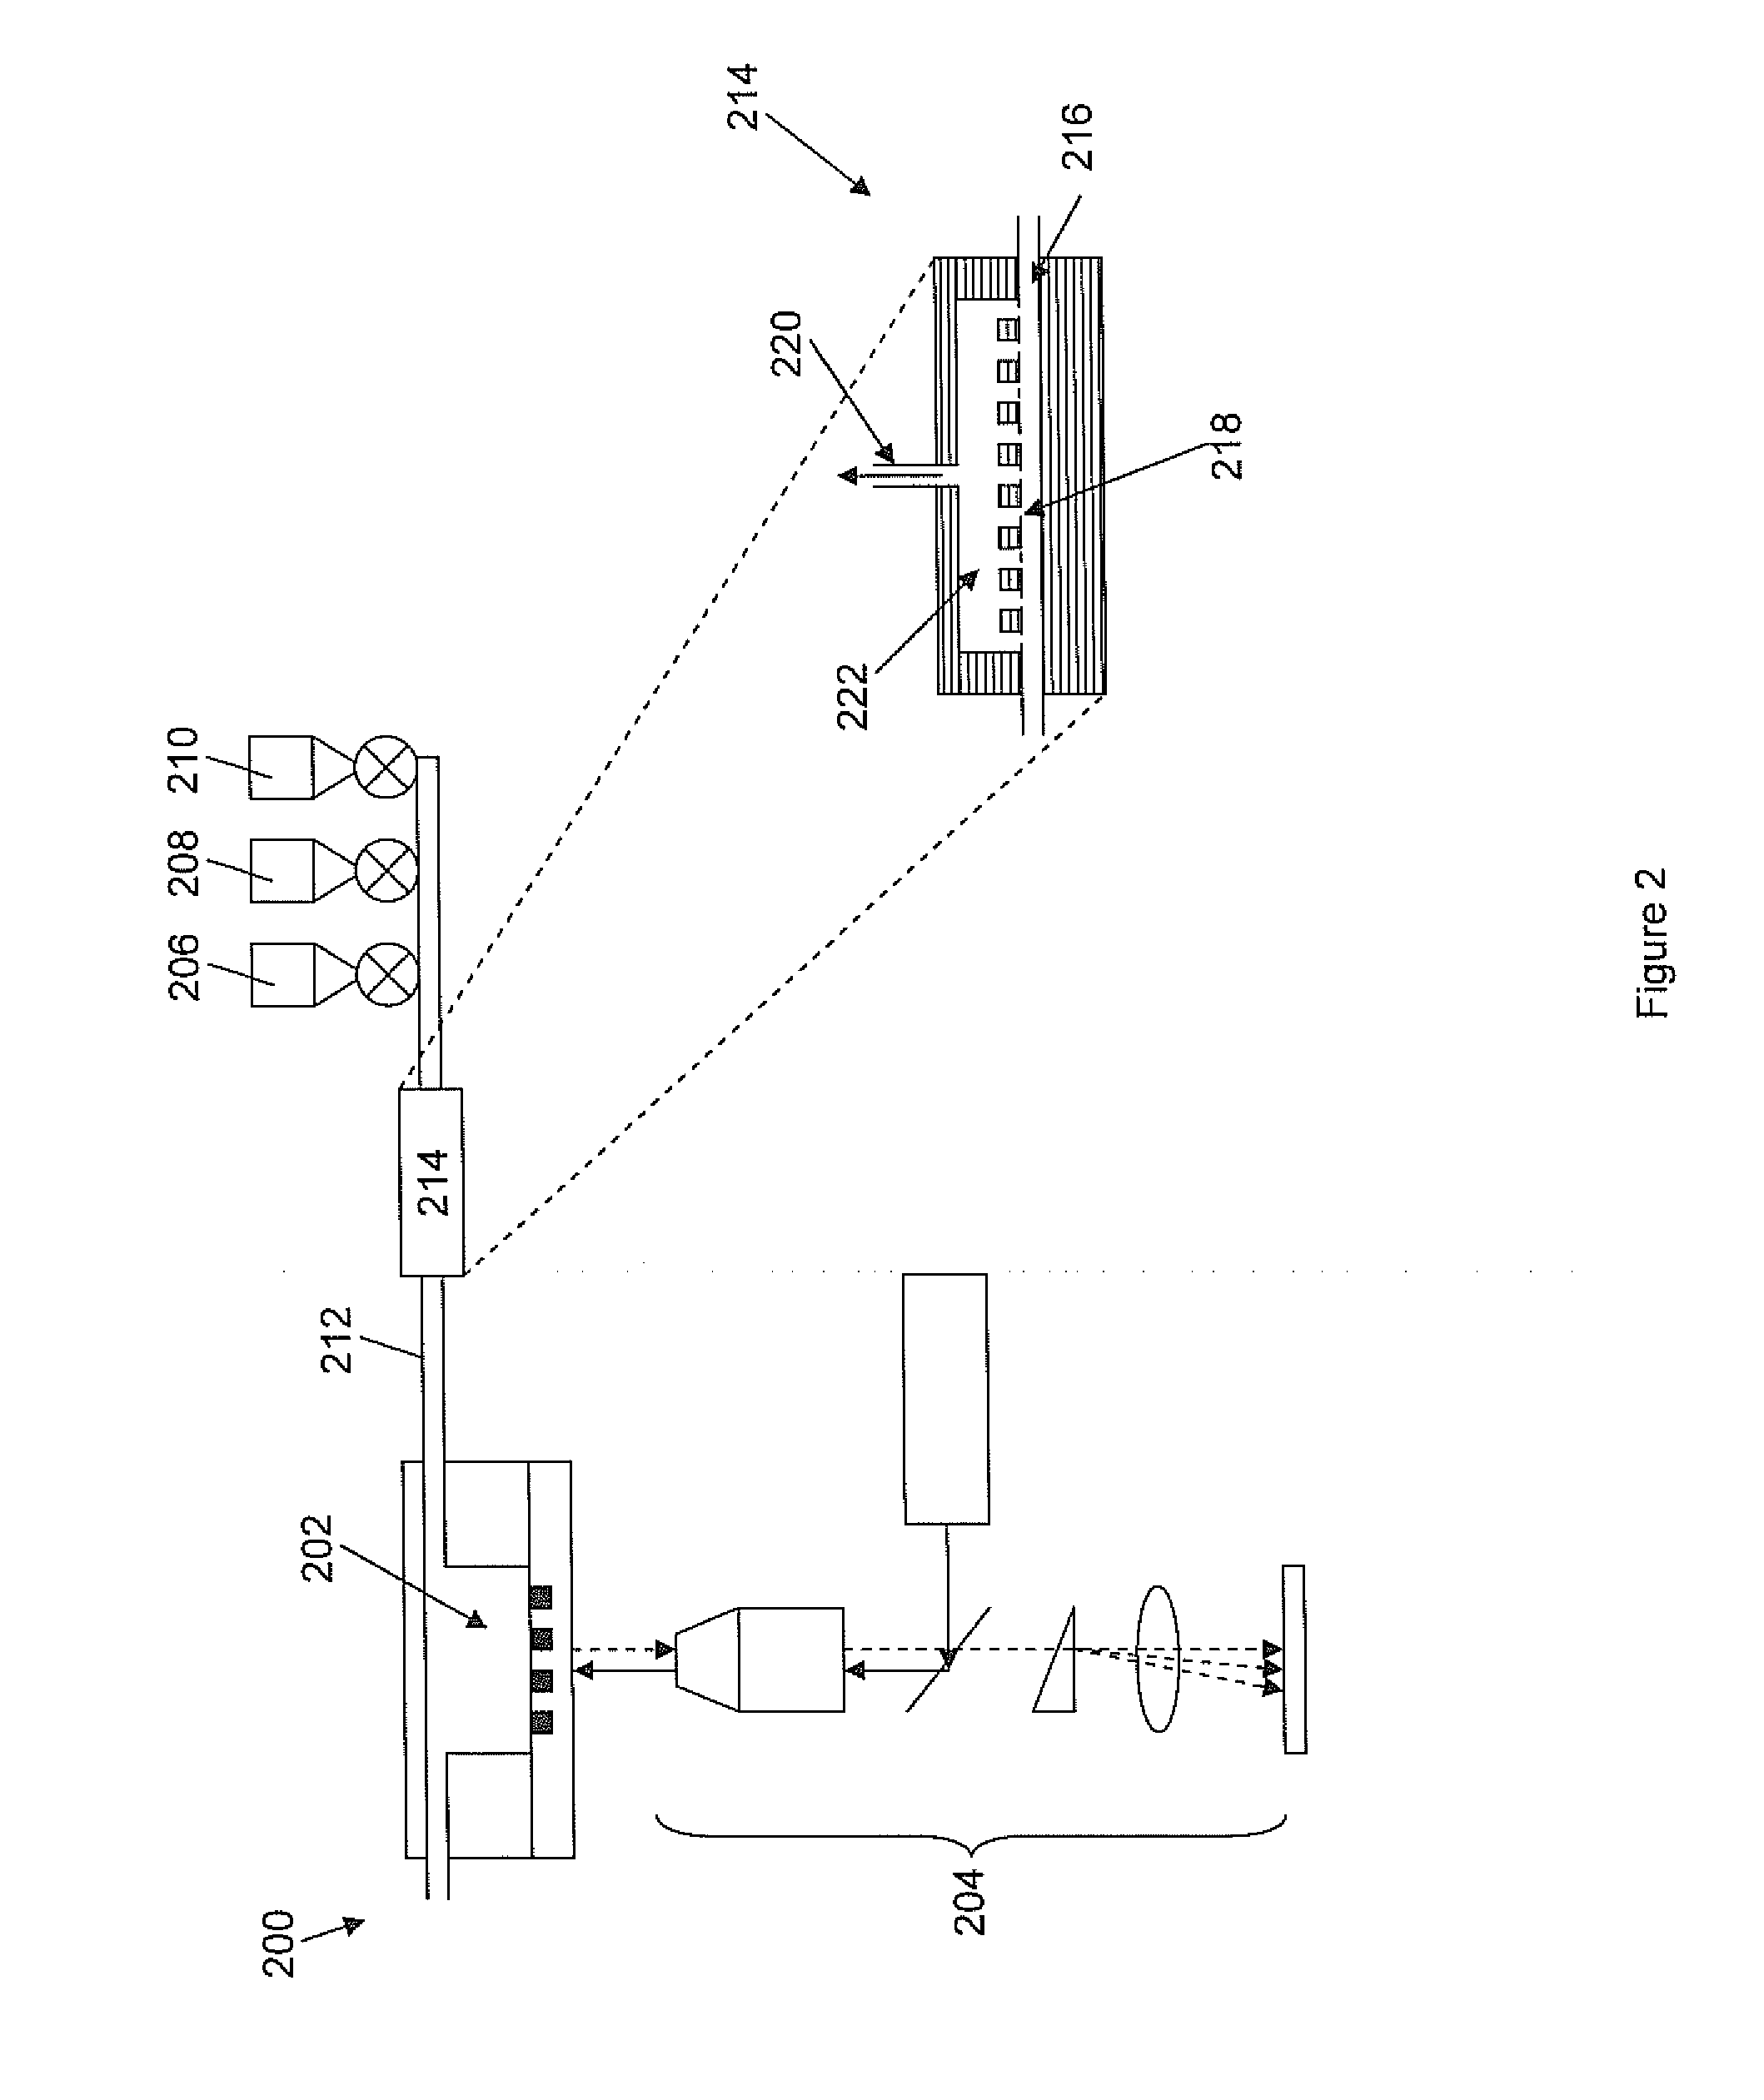 Methods and systems for mitigating oxygen enhanced damage in real-time analytical operations